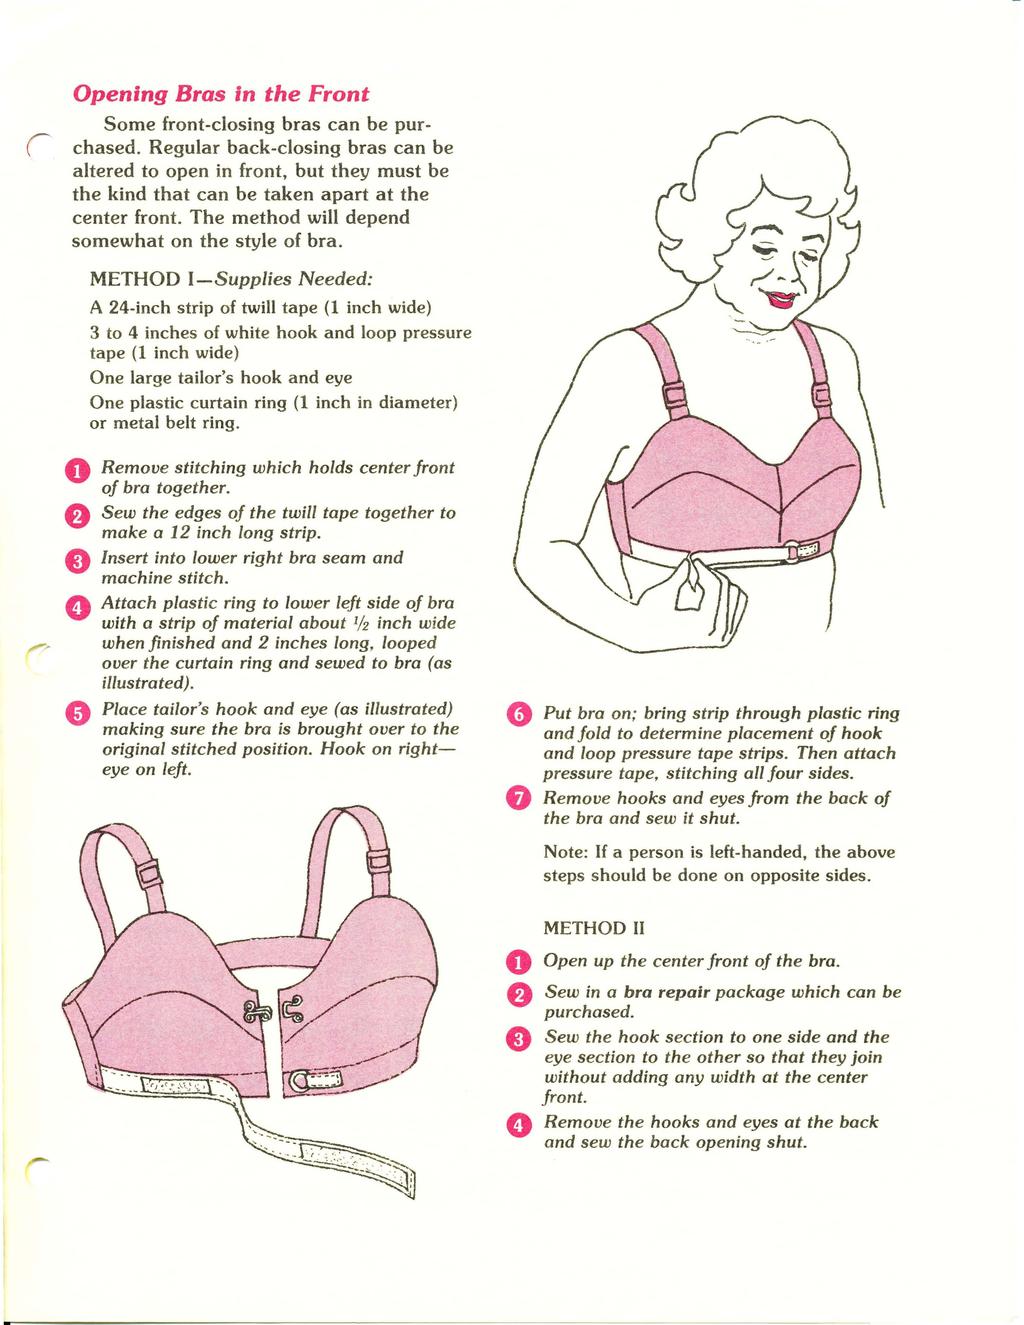 r Opening Bras in the Frnt Sme frnt-clsing bras can be purchased. Regular back-clsing bras can be altered t pen in frnt, but they must be the kind that can be taken apart at the center frnt.